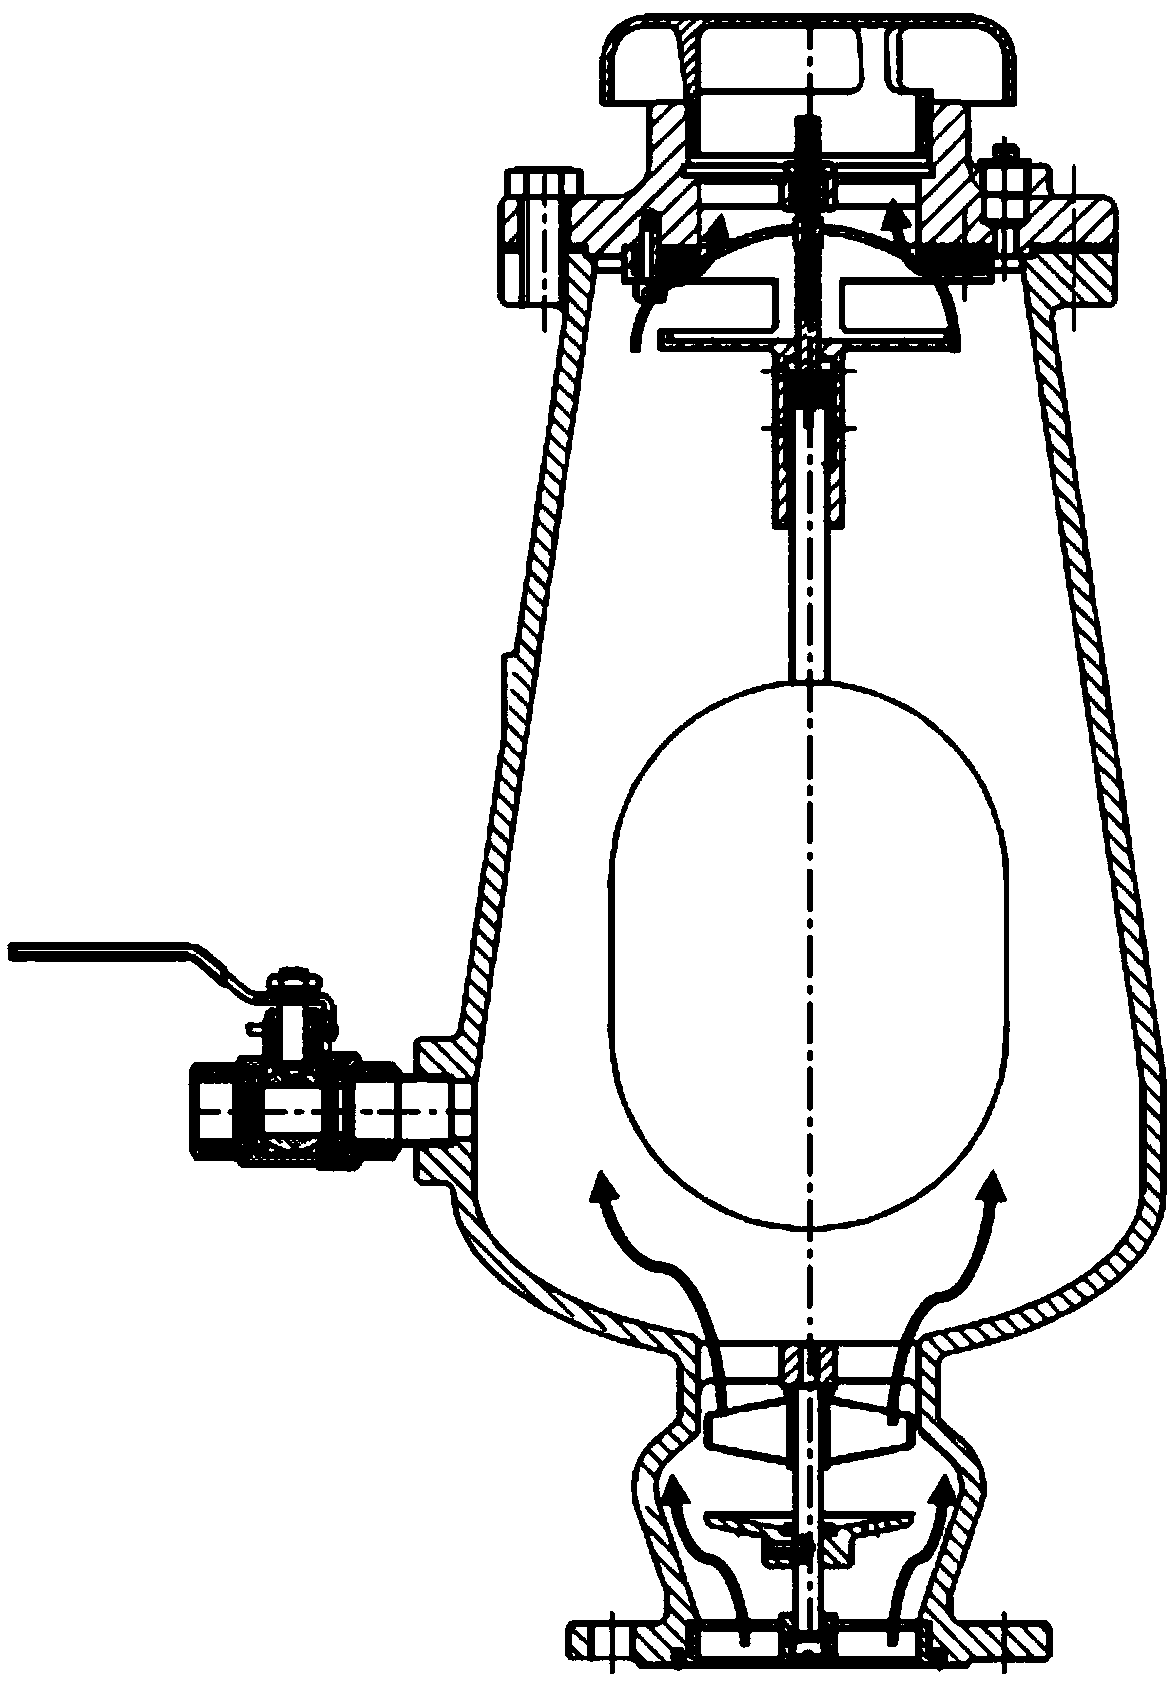 A Compound Exhaust Valve with Buffer Device